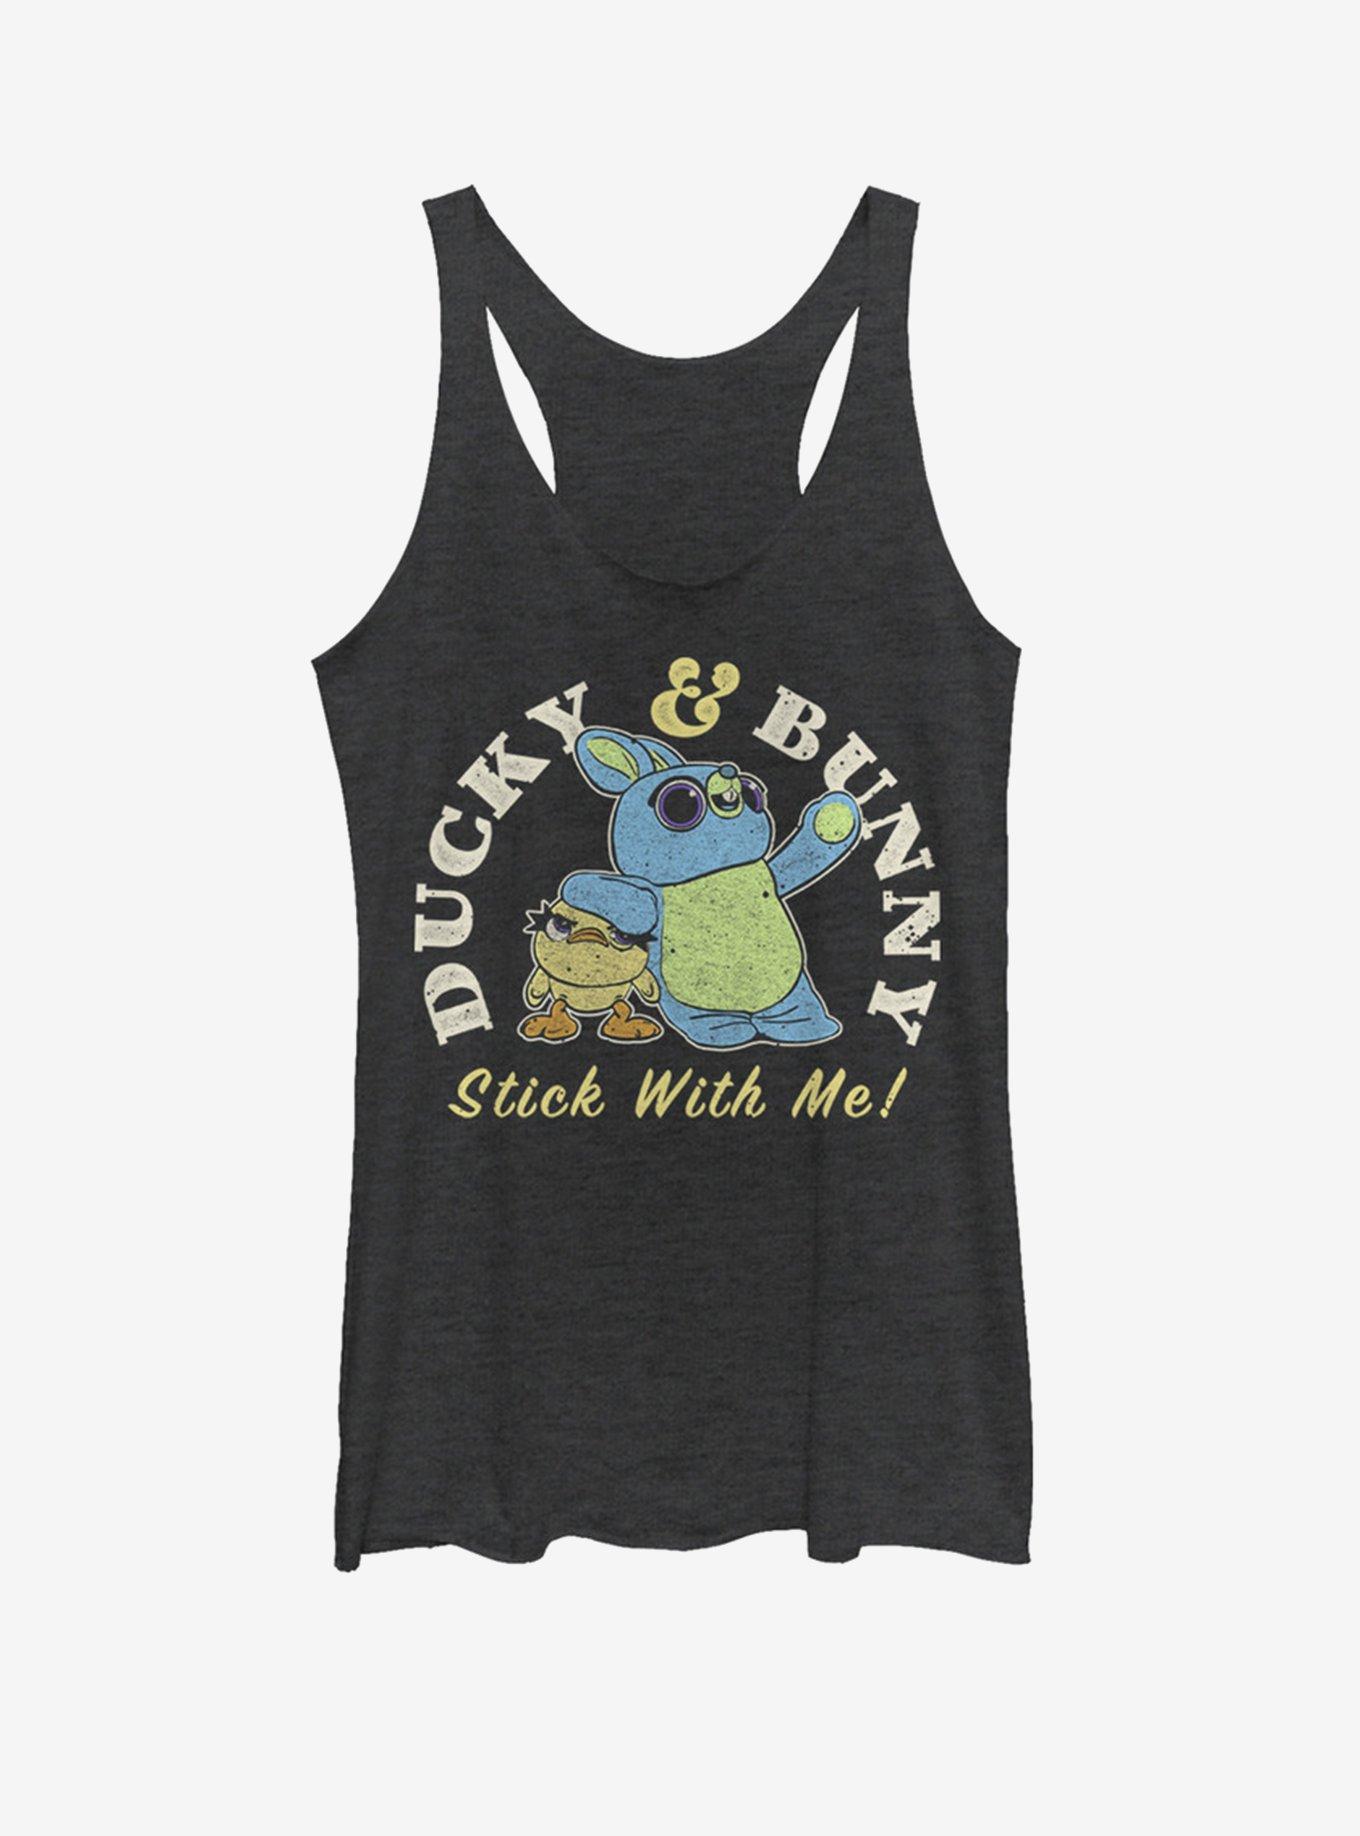 Disney Pixar Toy Story 4 Ducky And Bunny Brand Girls Black Heathered Tank Top, BLK HTR, hi-res